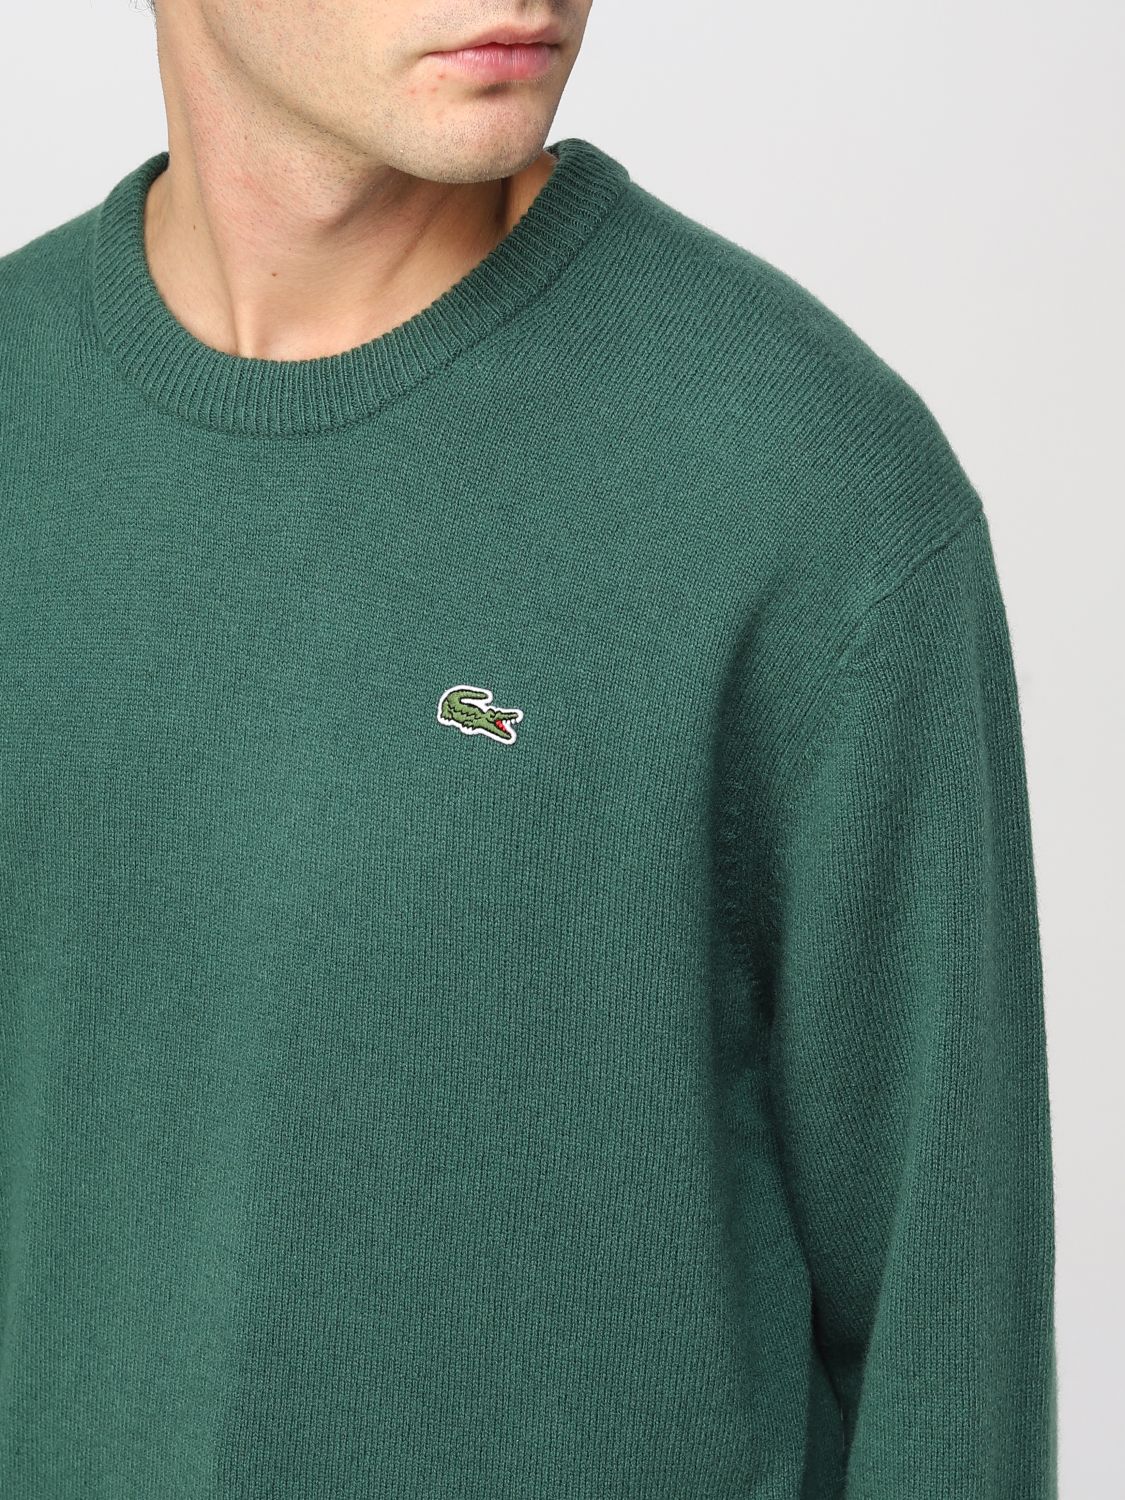 LACOSTE: sweater for man - Green | Lacoste sweater AH1988 online on ...